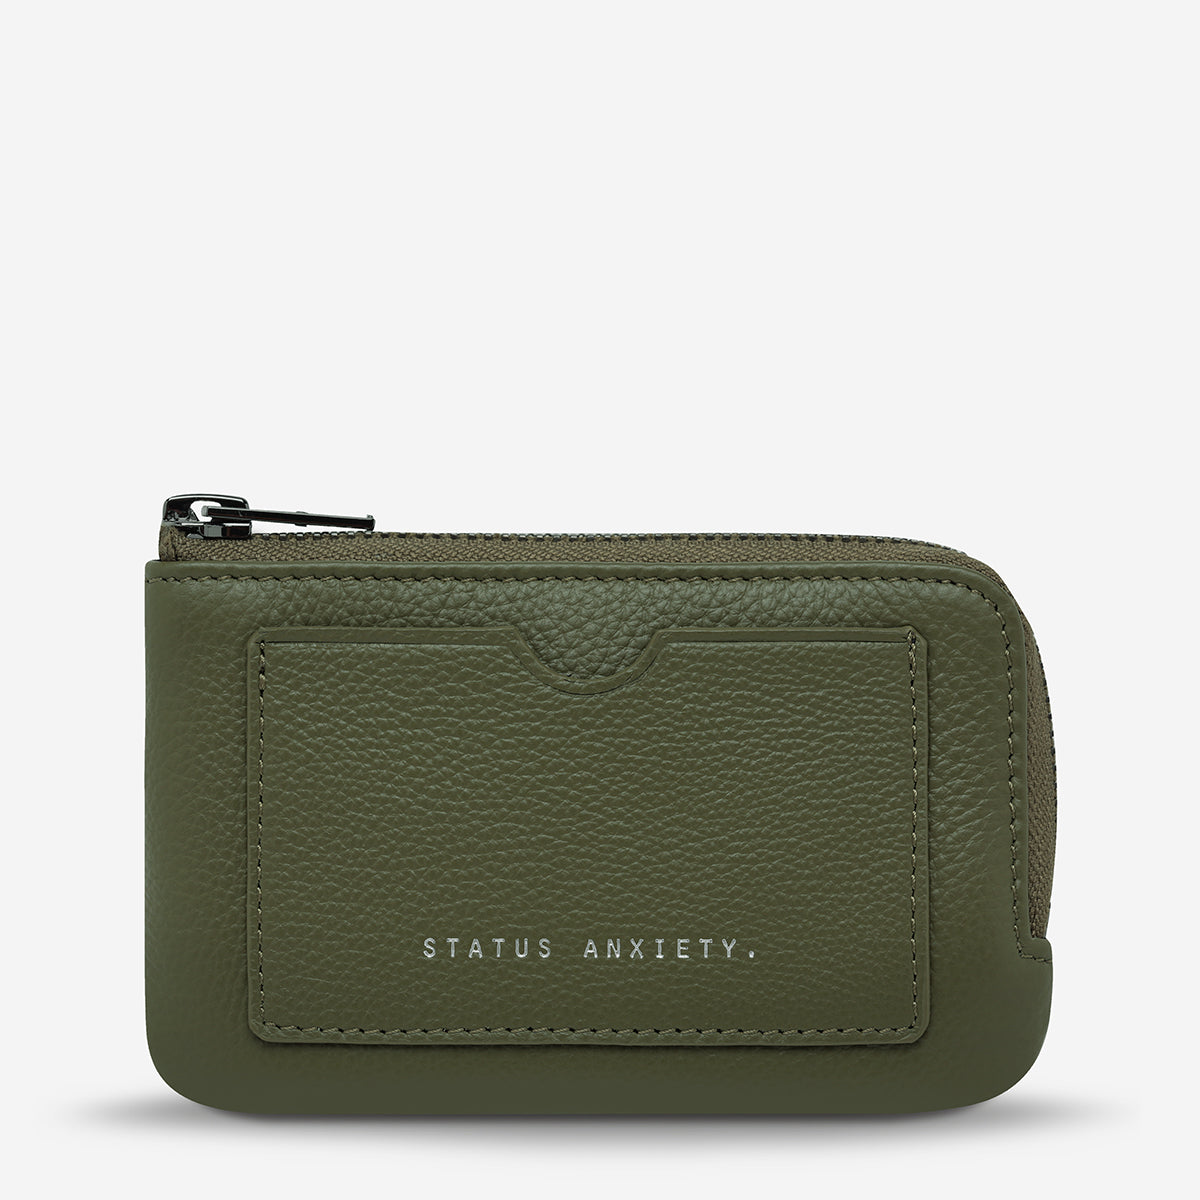 Left Behind Khaki Leather Pouch - Status Ansiety - Mandi at Home